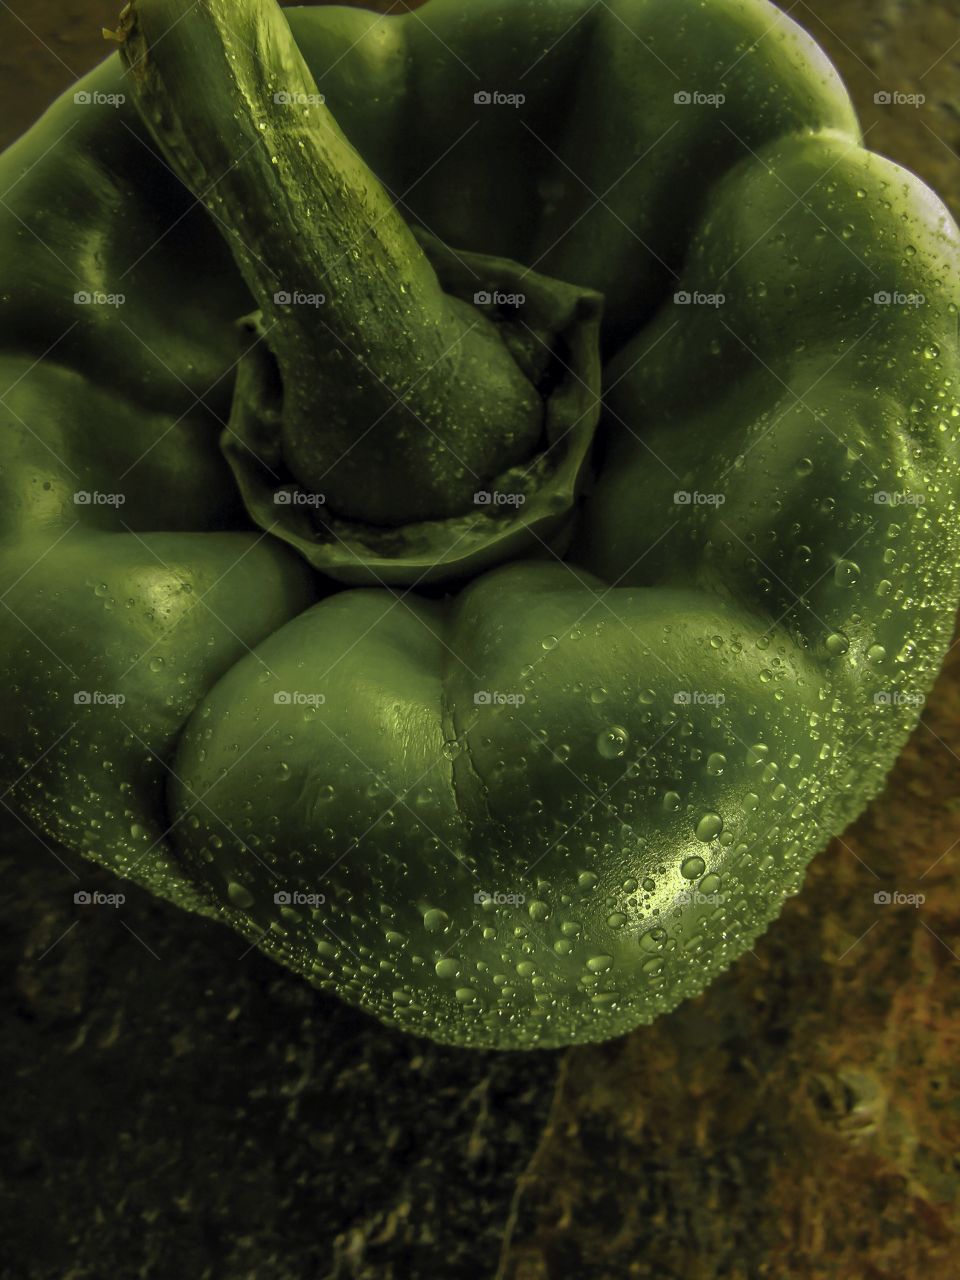 Green pepper, close up, stone table, water drops, color, green, cooking, delicious, vegan, diet, eating, food, fresh, harvest, healty, macro, close up, nutritious, nutrition, one, raw, produce, refreshment, shiny, single, vegan, tasty, vegetable, vitamin